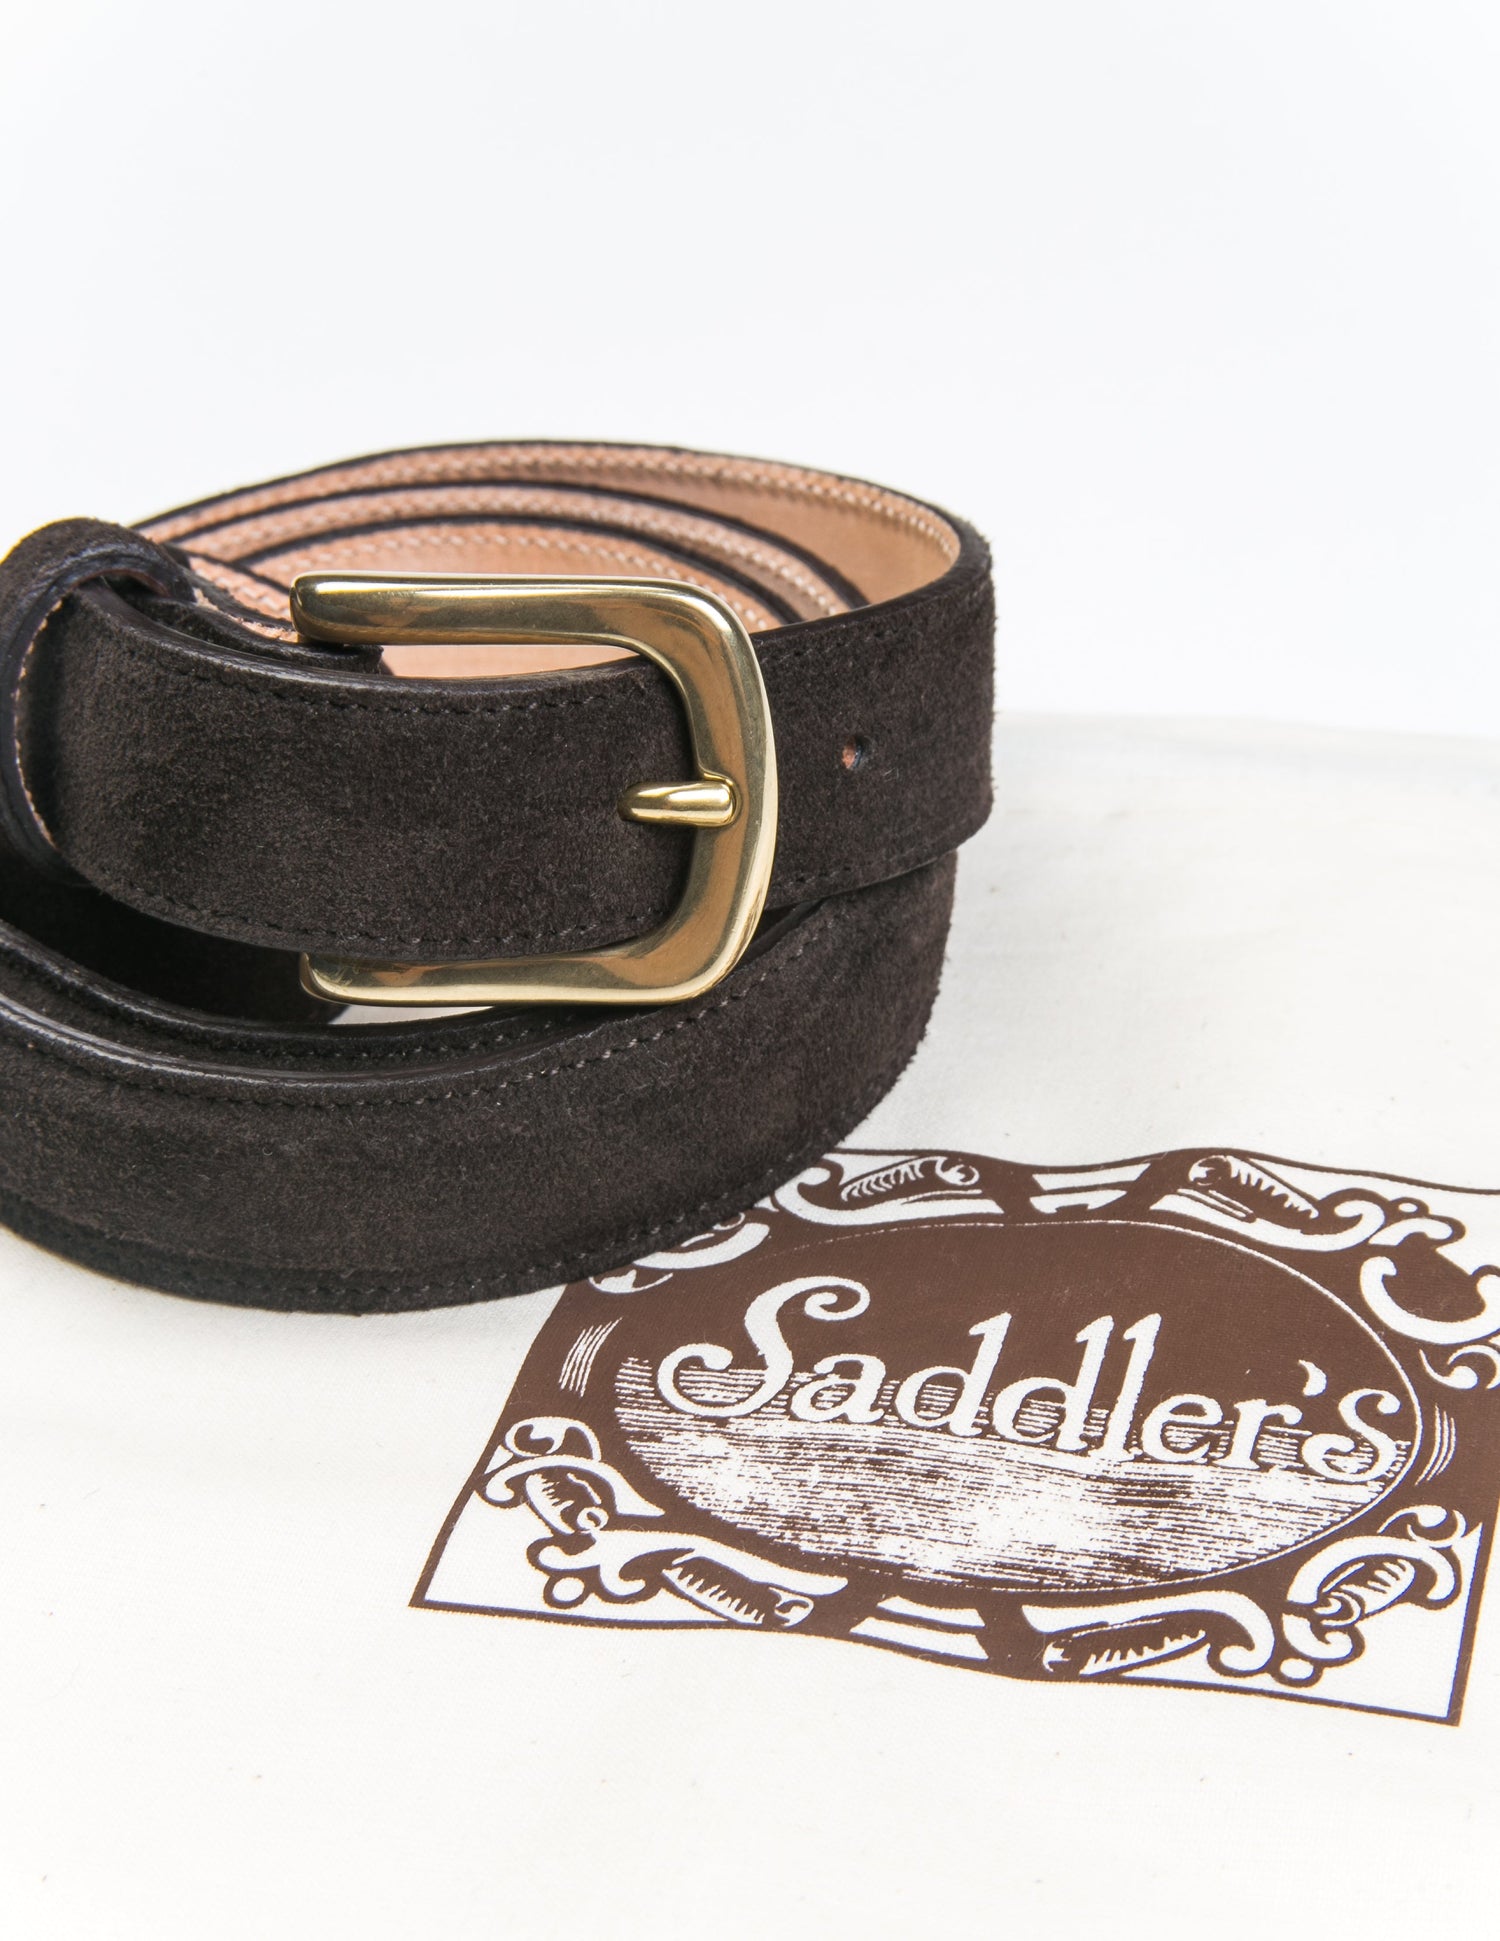 Photo of Brooklyn Tailors x Saddler's 25mm Belt in Suede Leather - Deep Brown coiled next to the fabric bag it is sold with. 